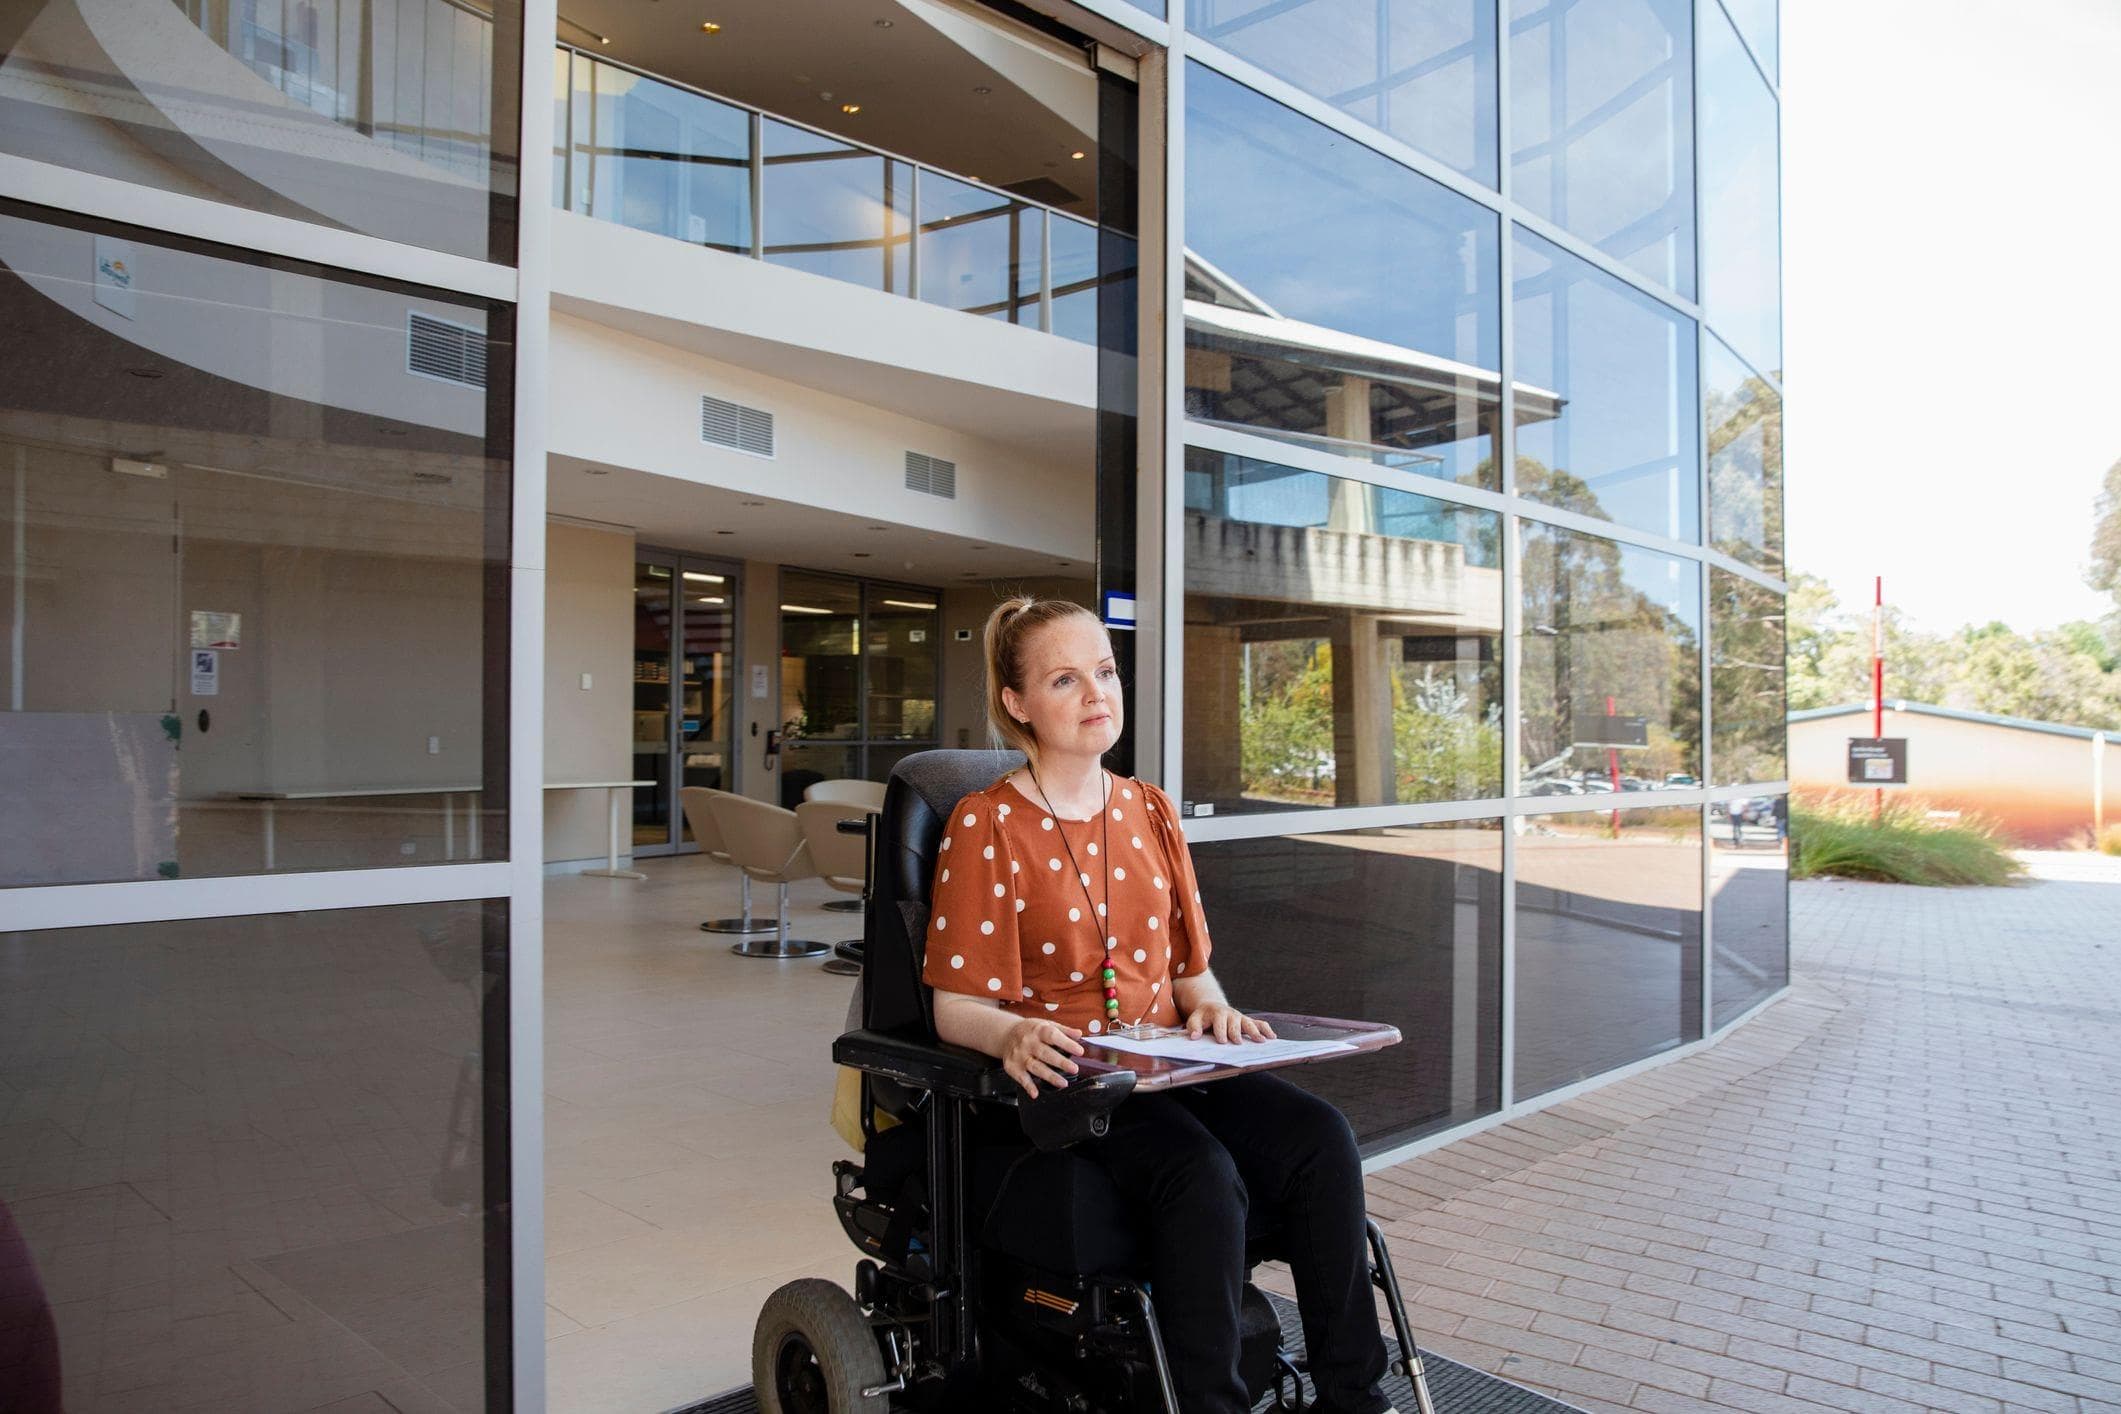 commercial automatic doors full accessible for mobility device users